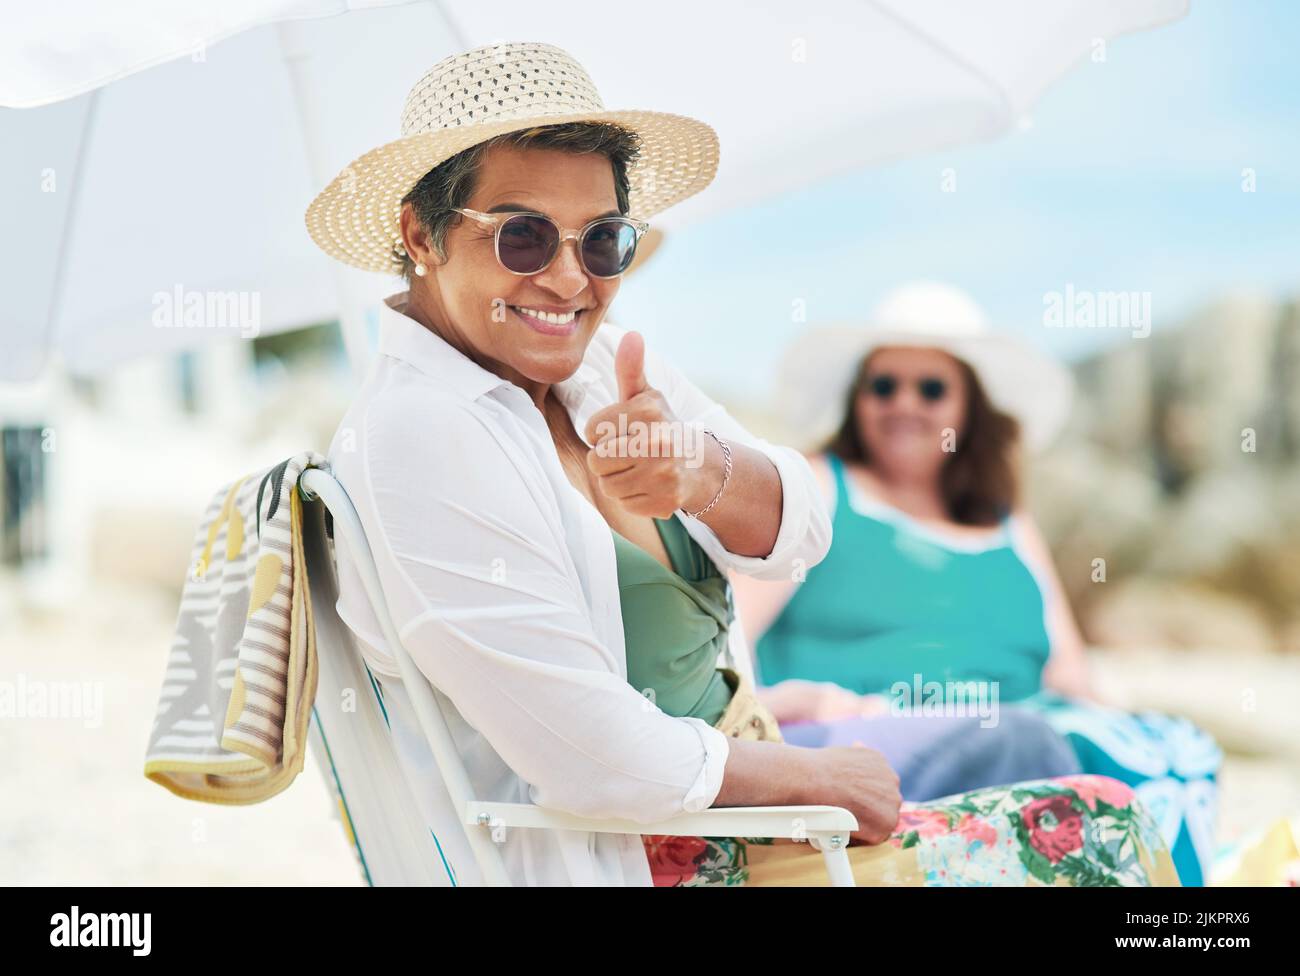 Its a beach day with the girls. a mature woman sitting and making a thumbs up gesture during a day out on the beach with friends. Stock Photo